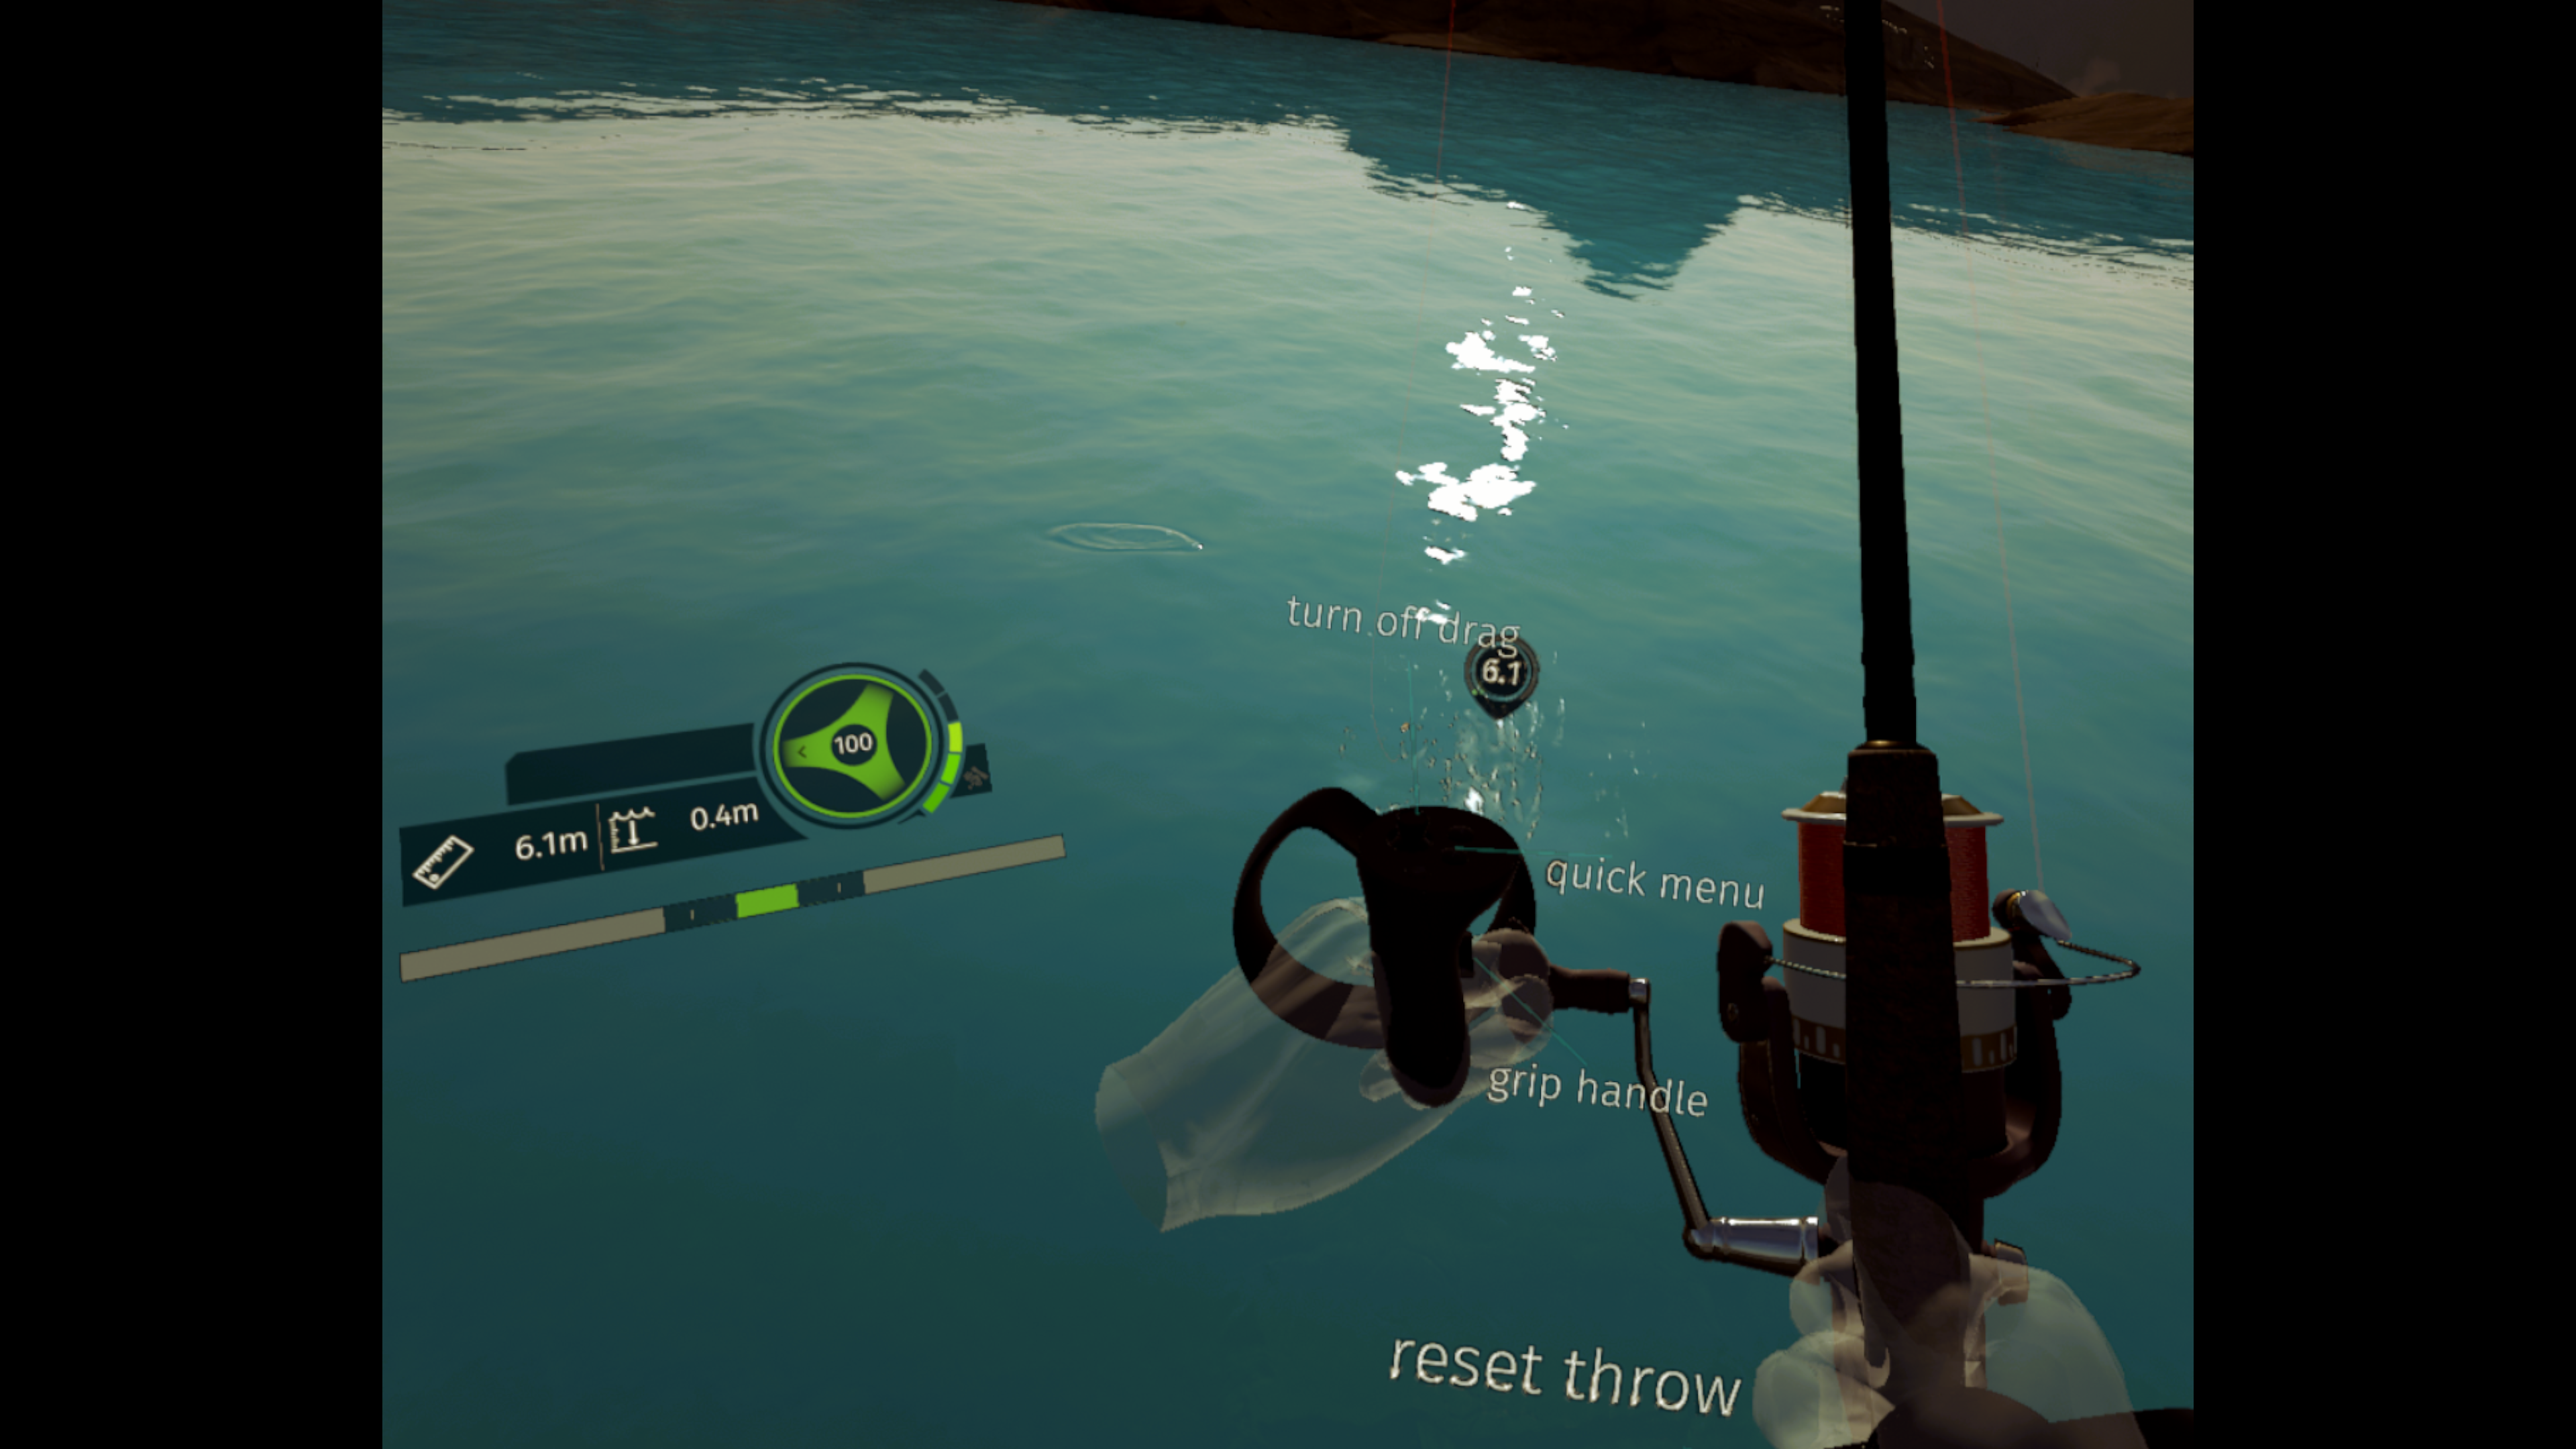 Ultimate Fishing Simulator PCVR Review - If There's Better, Let Minnow.